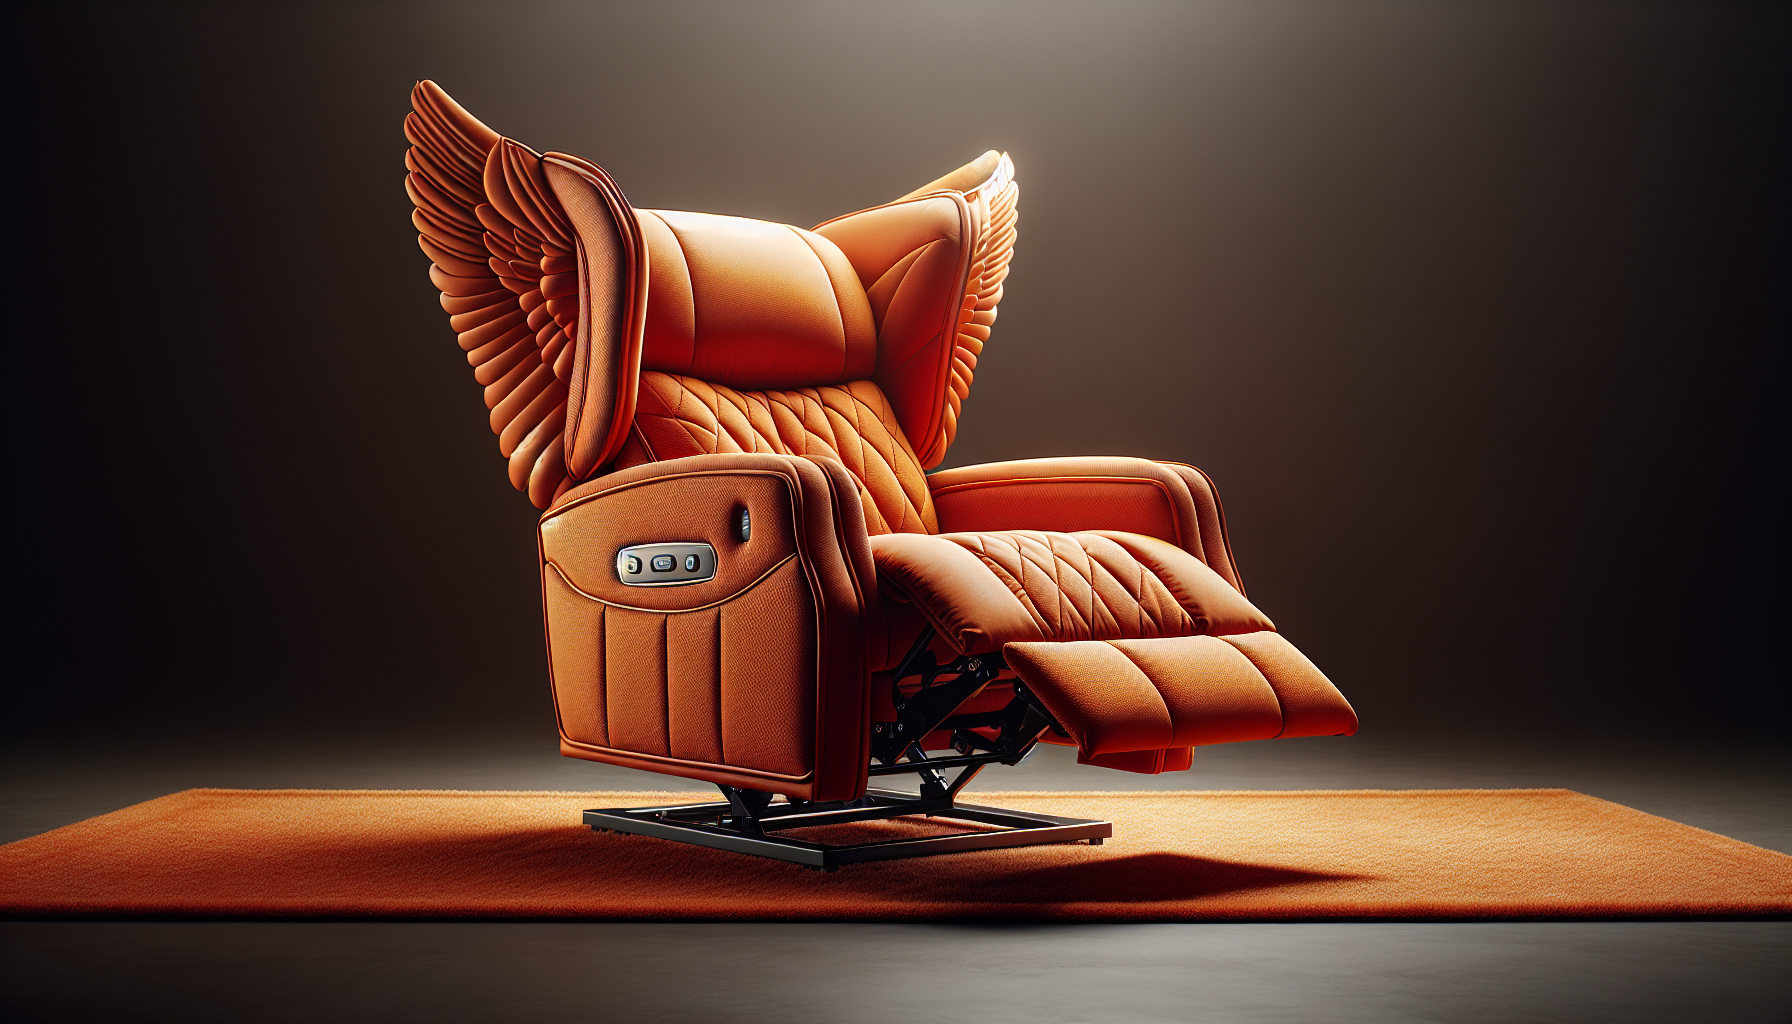 Orange Power Lift Recliner Chairs: The Ultimate Blend of Comfort and Style